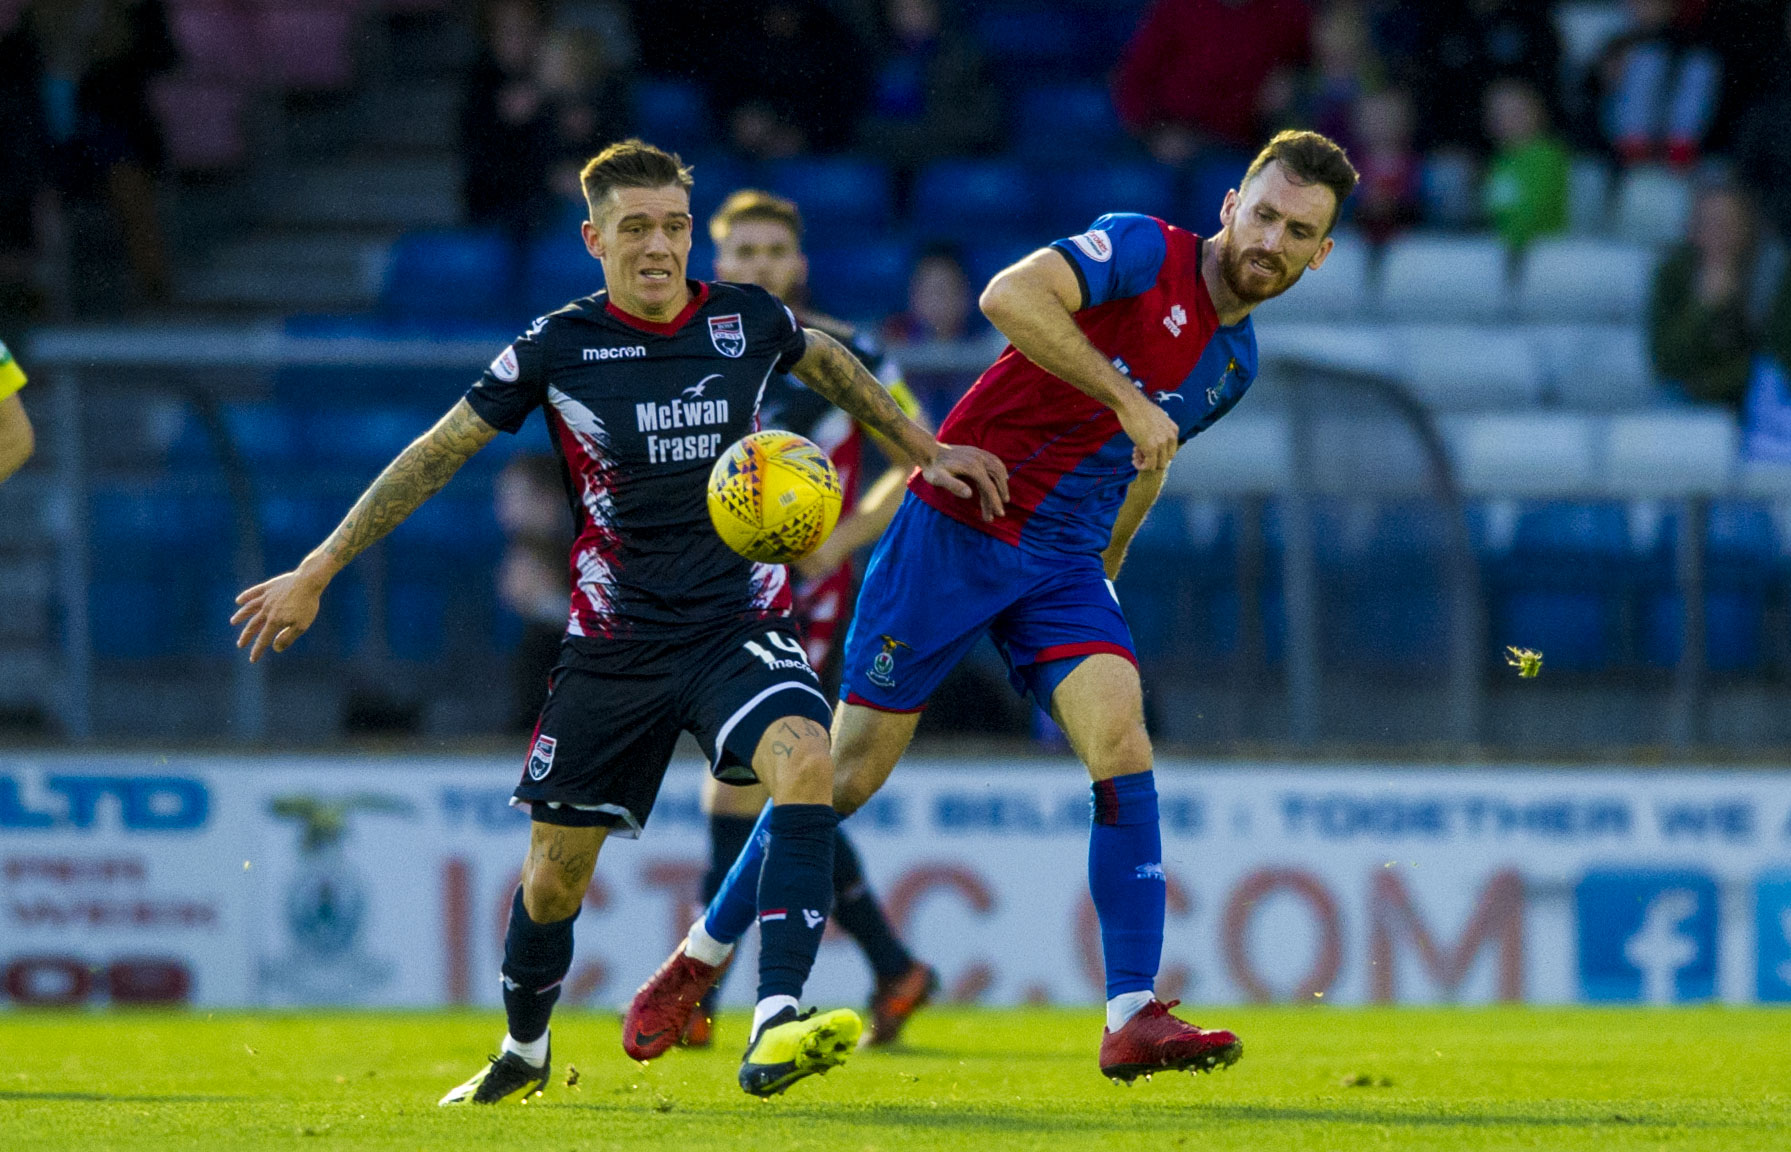 Joe Chalmers is set to start for Caley Thistle at left-back.